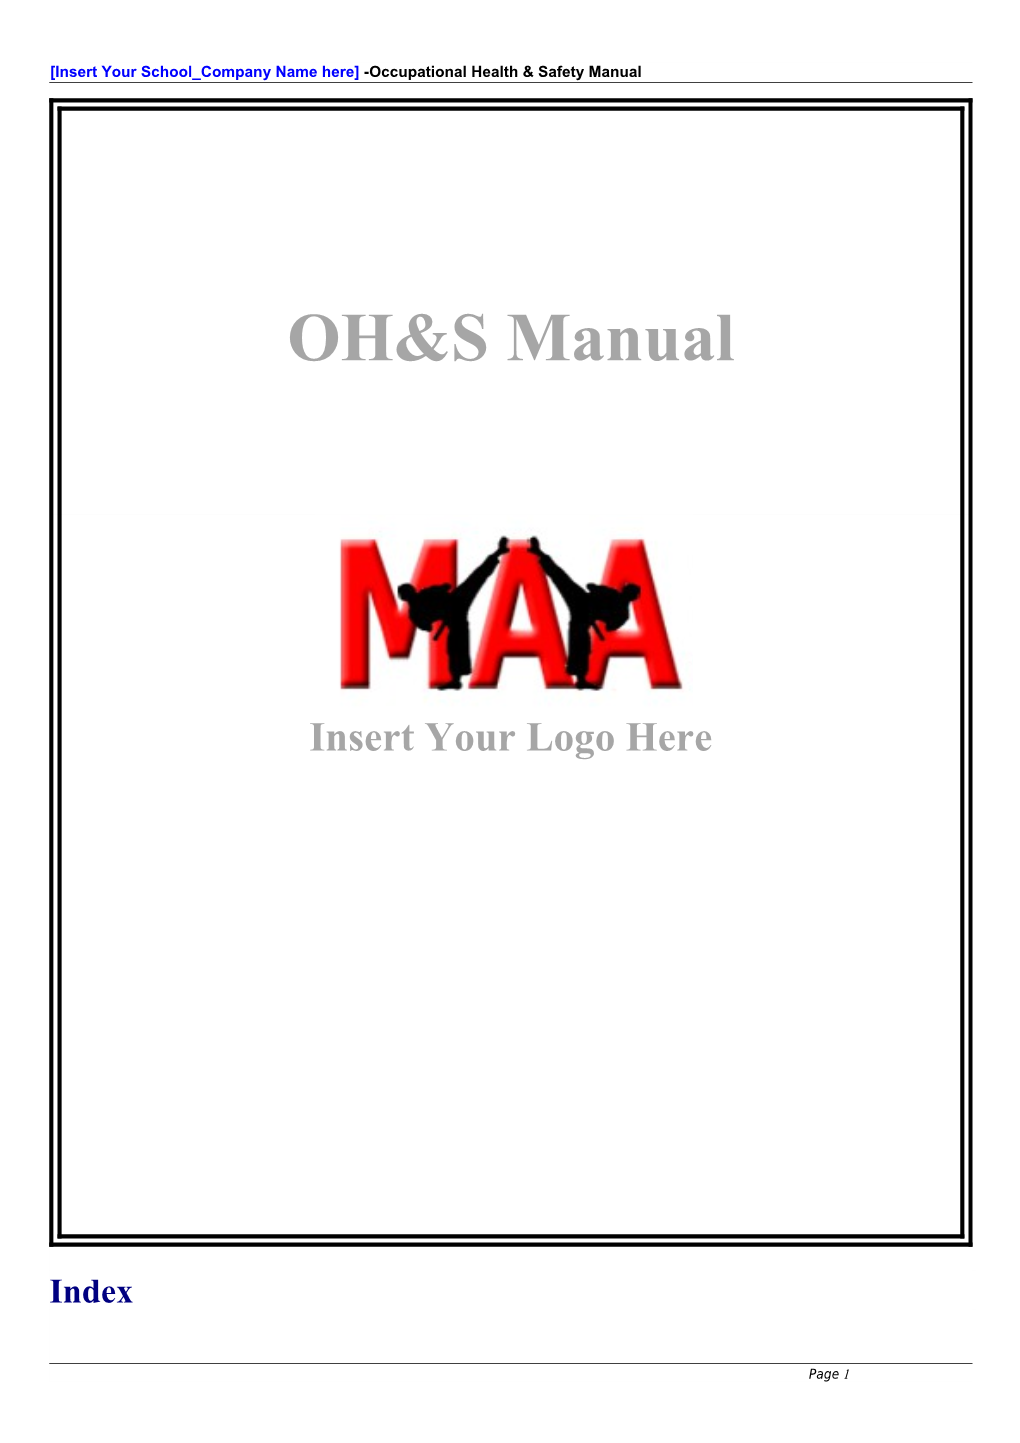 Insert Your School Company Name Here -Occupational Health & Safety Manual